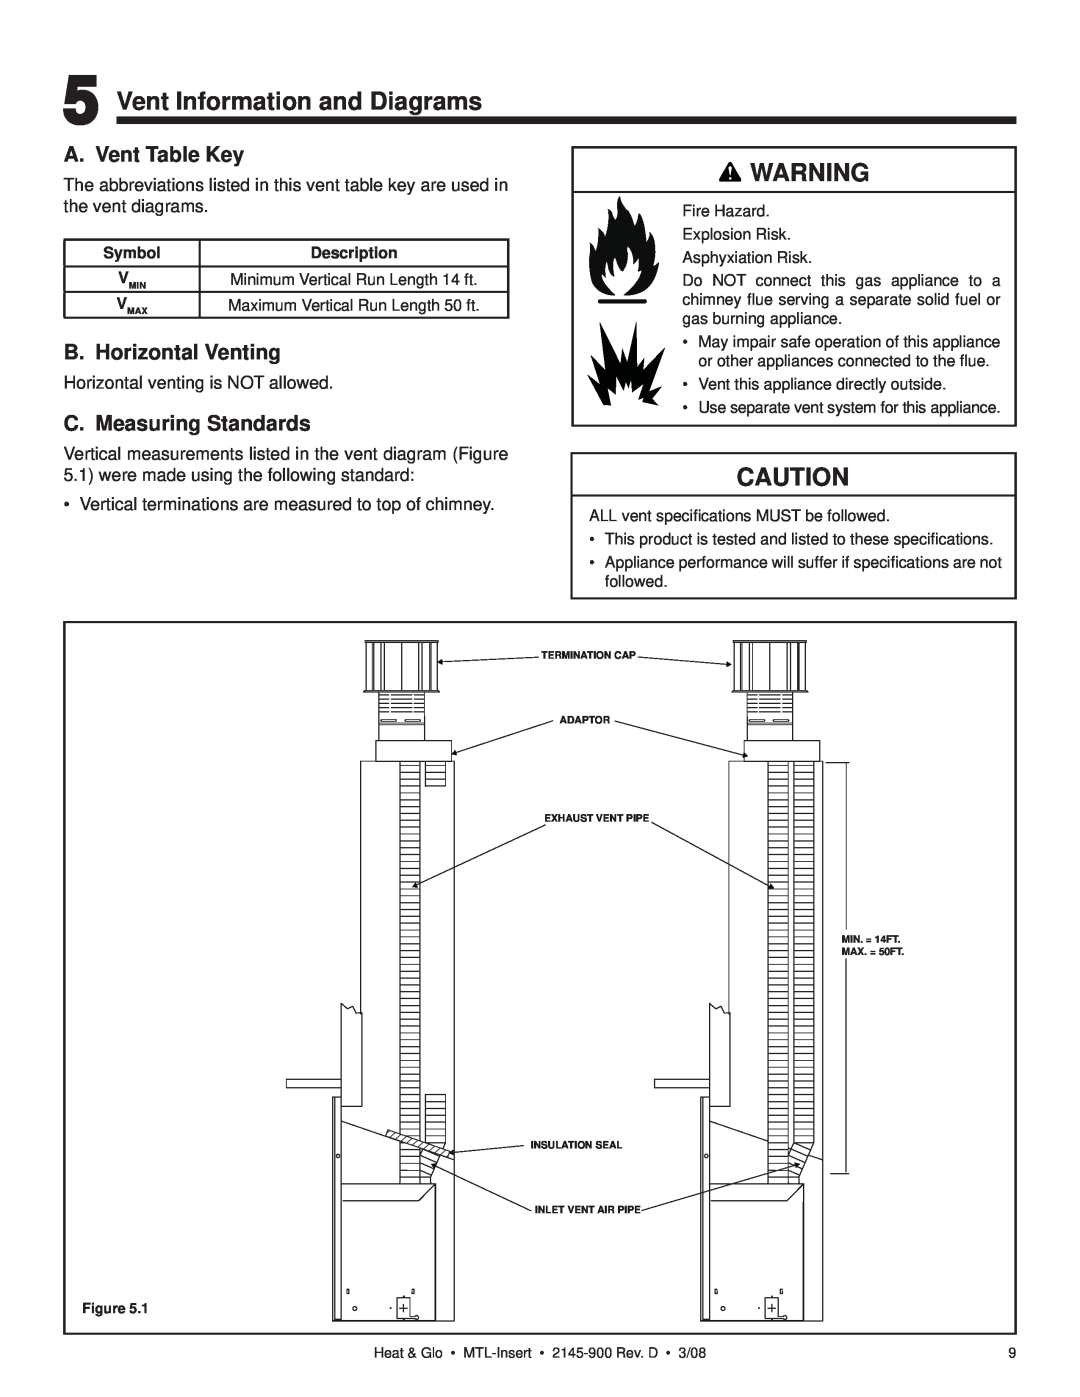 Heat & Glo LifeStyle MTL-INSERT owner manual Vent Information and Diagrams, A. Vent Table Key, B. Horizontal Venting 